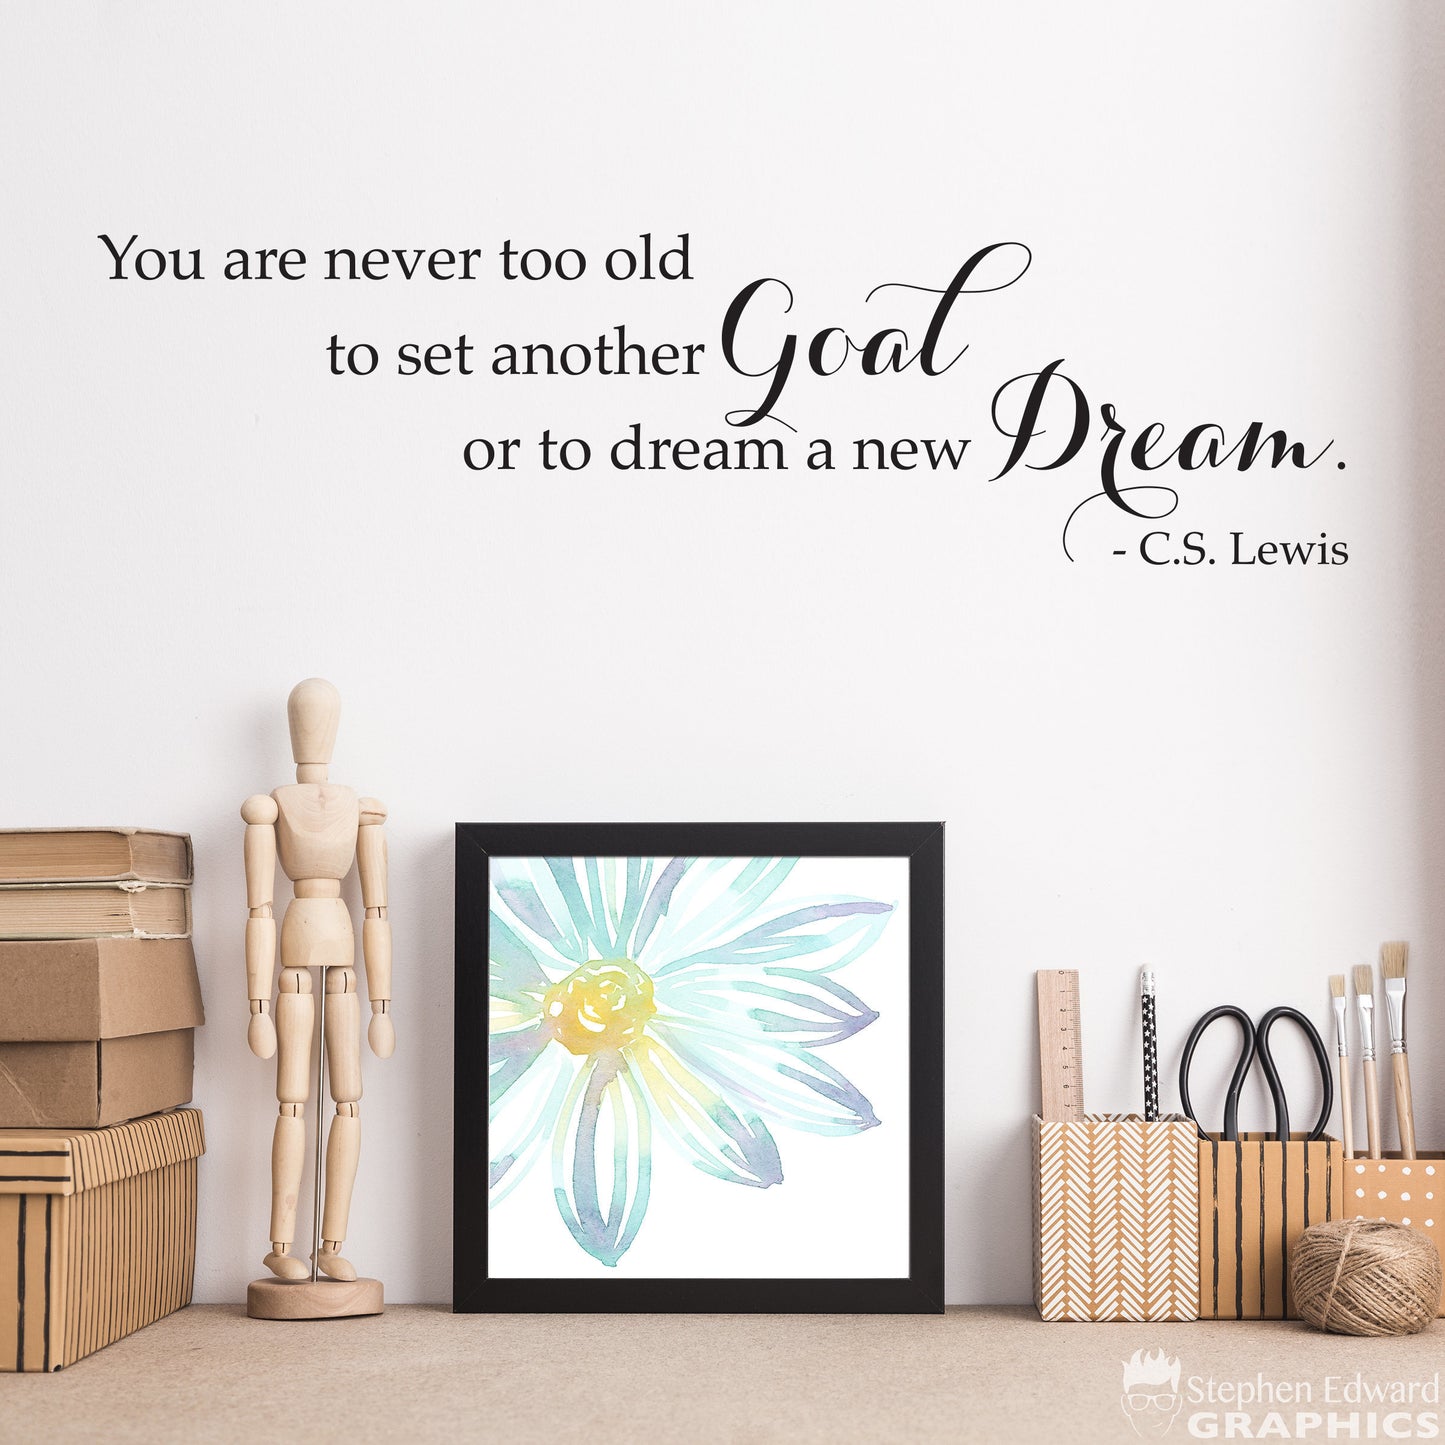 You are never too old to set another Goal or to dream a new Dream Decal - C.S. Lewis Quote Wall Art - Inspirational Decor